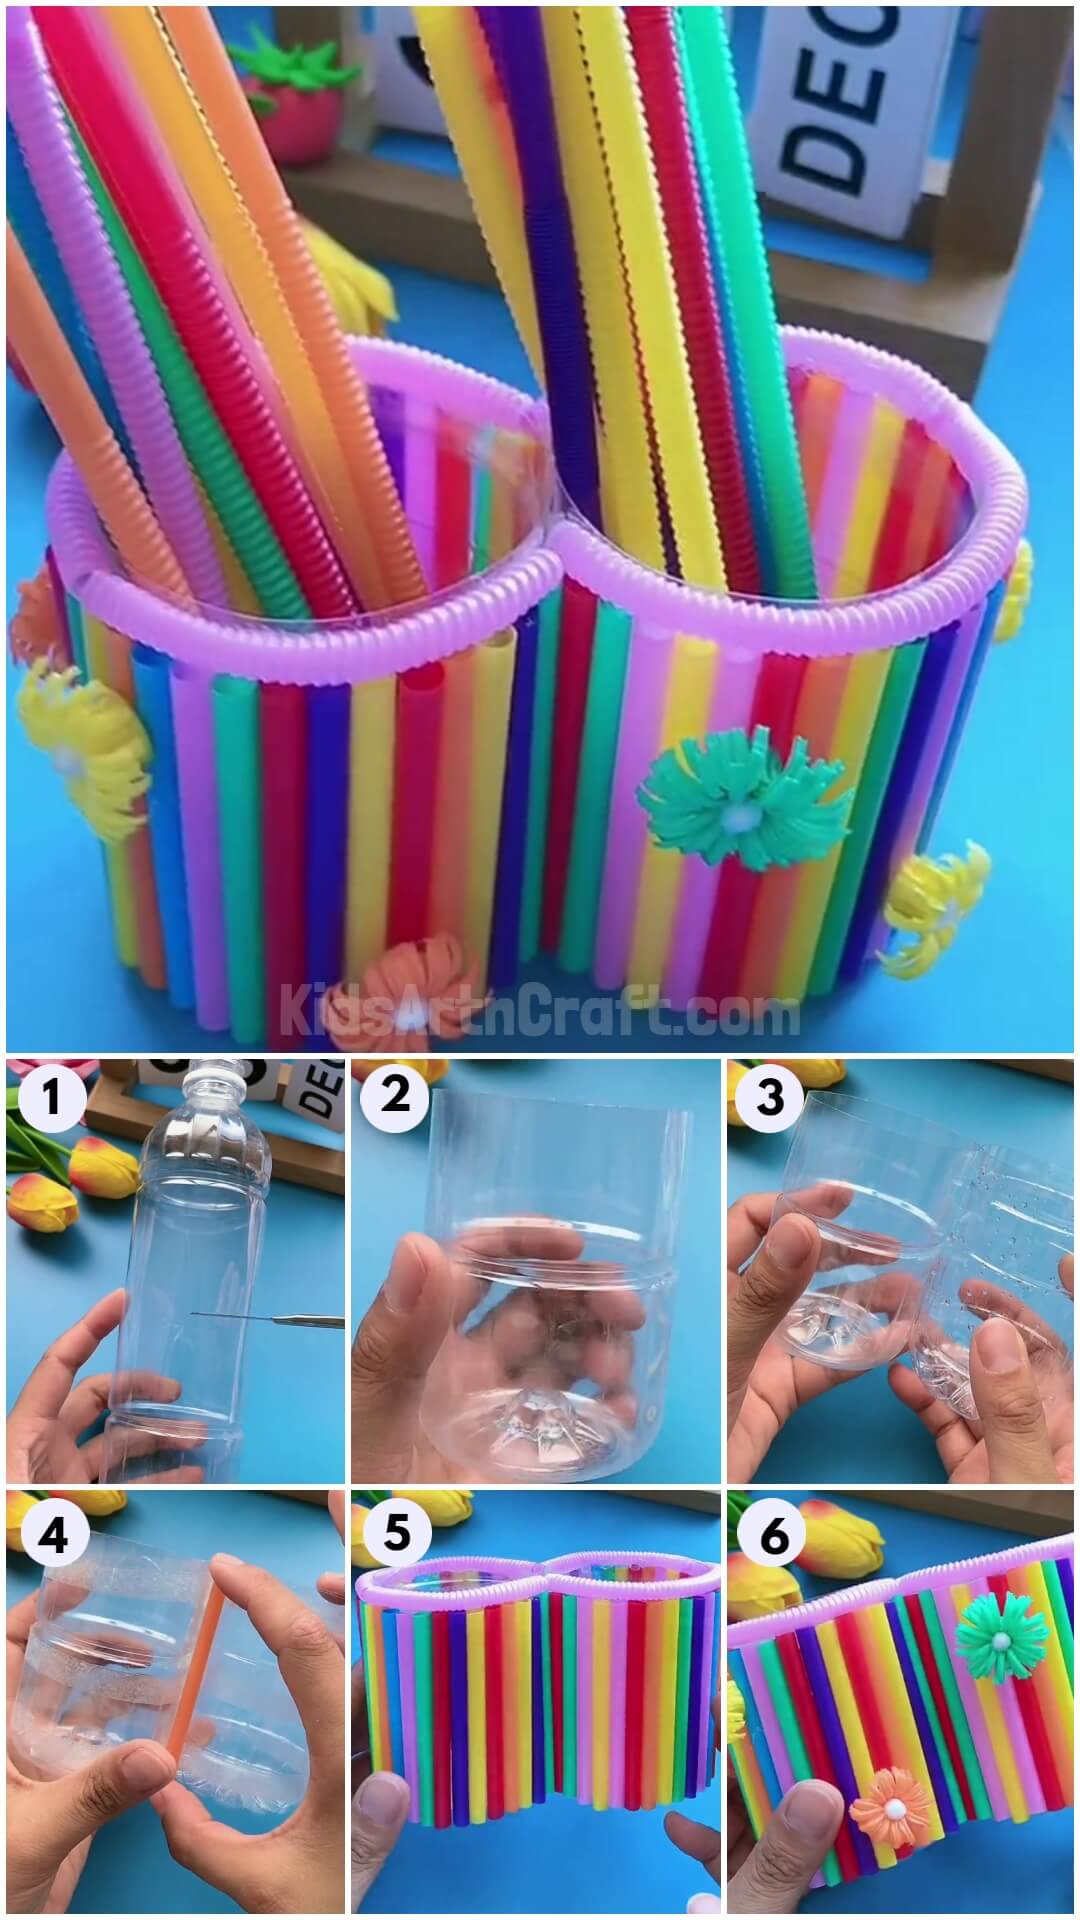 DIY pencil holder from plastic bottles and pipe cleaners